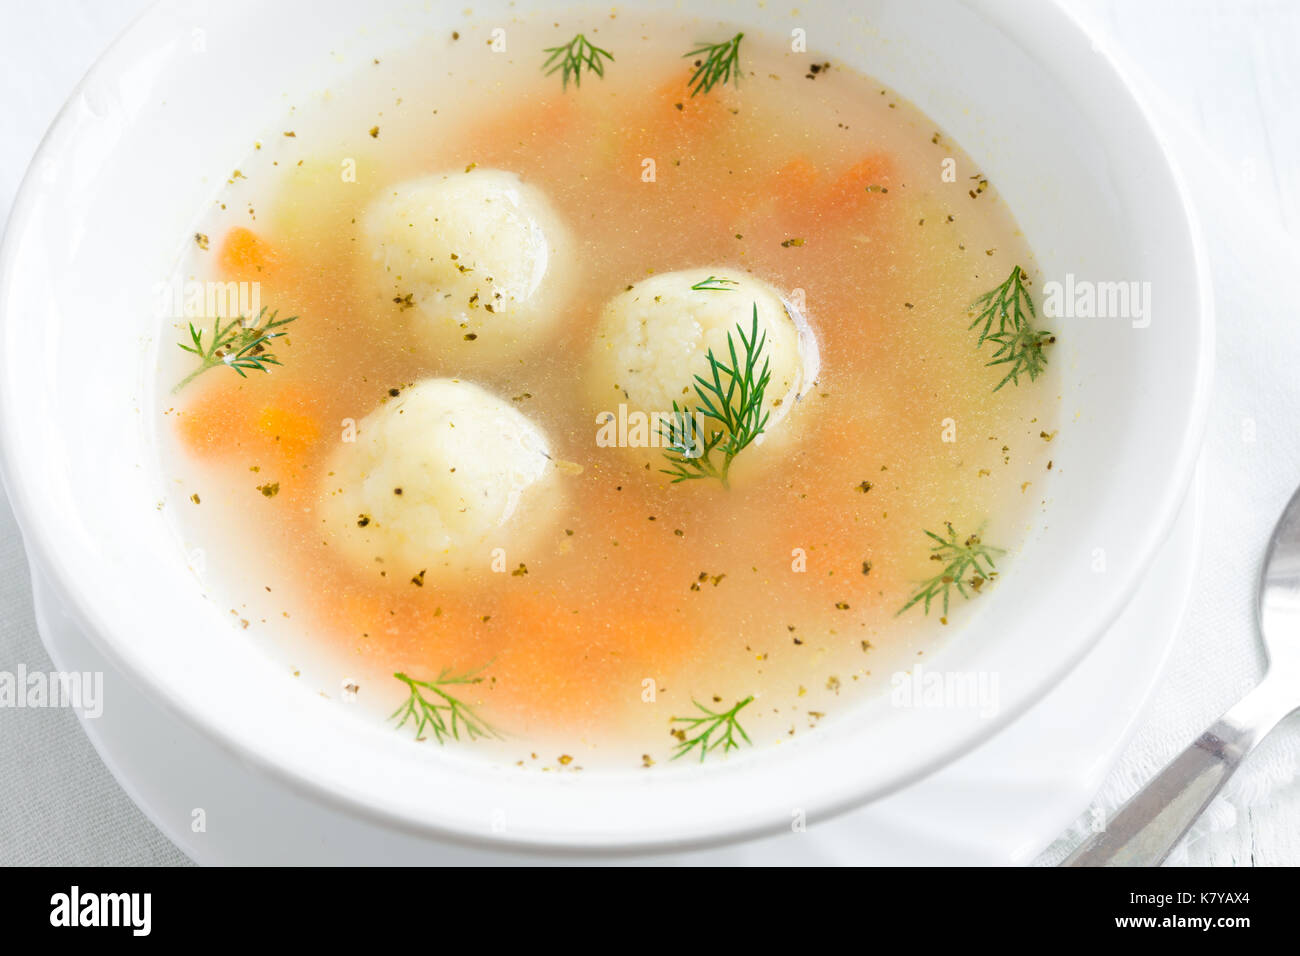 Matzoh ball soup. Jewish traditional cuisine, homemade Matzo Ball soup with vegetables. Stock Photo